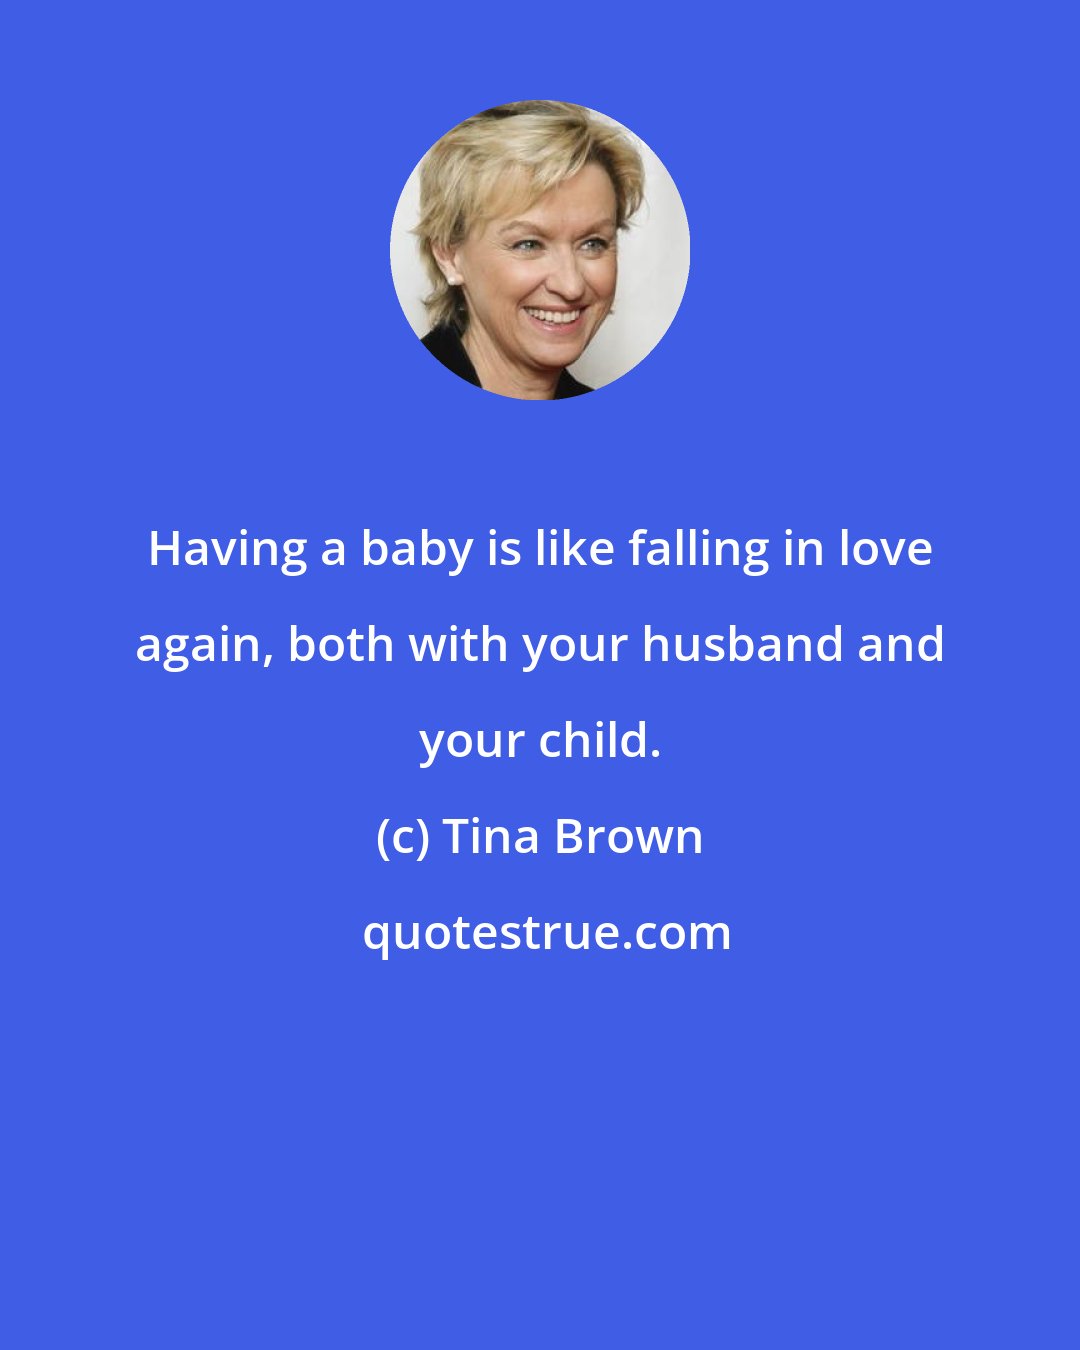 Tina Brown: Having a baby is like falling in love again, both with your husband and your child.